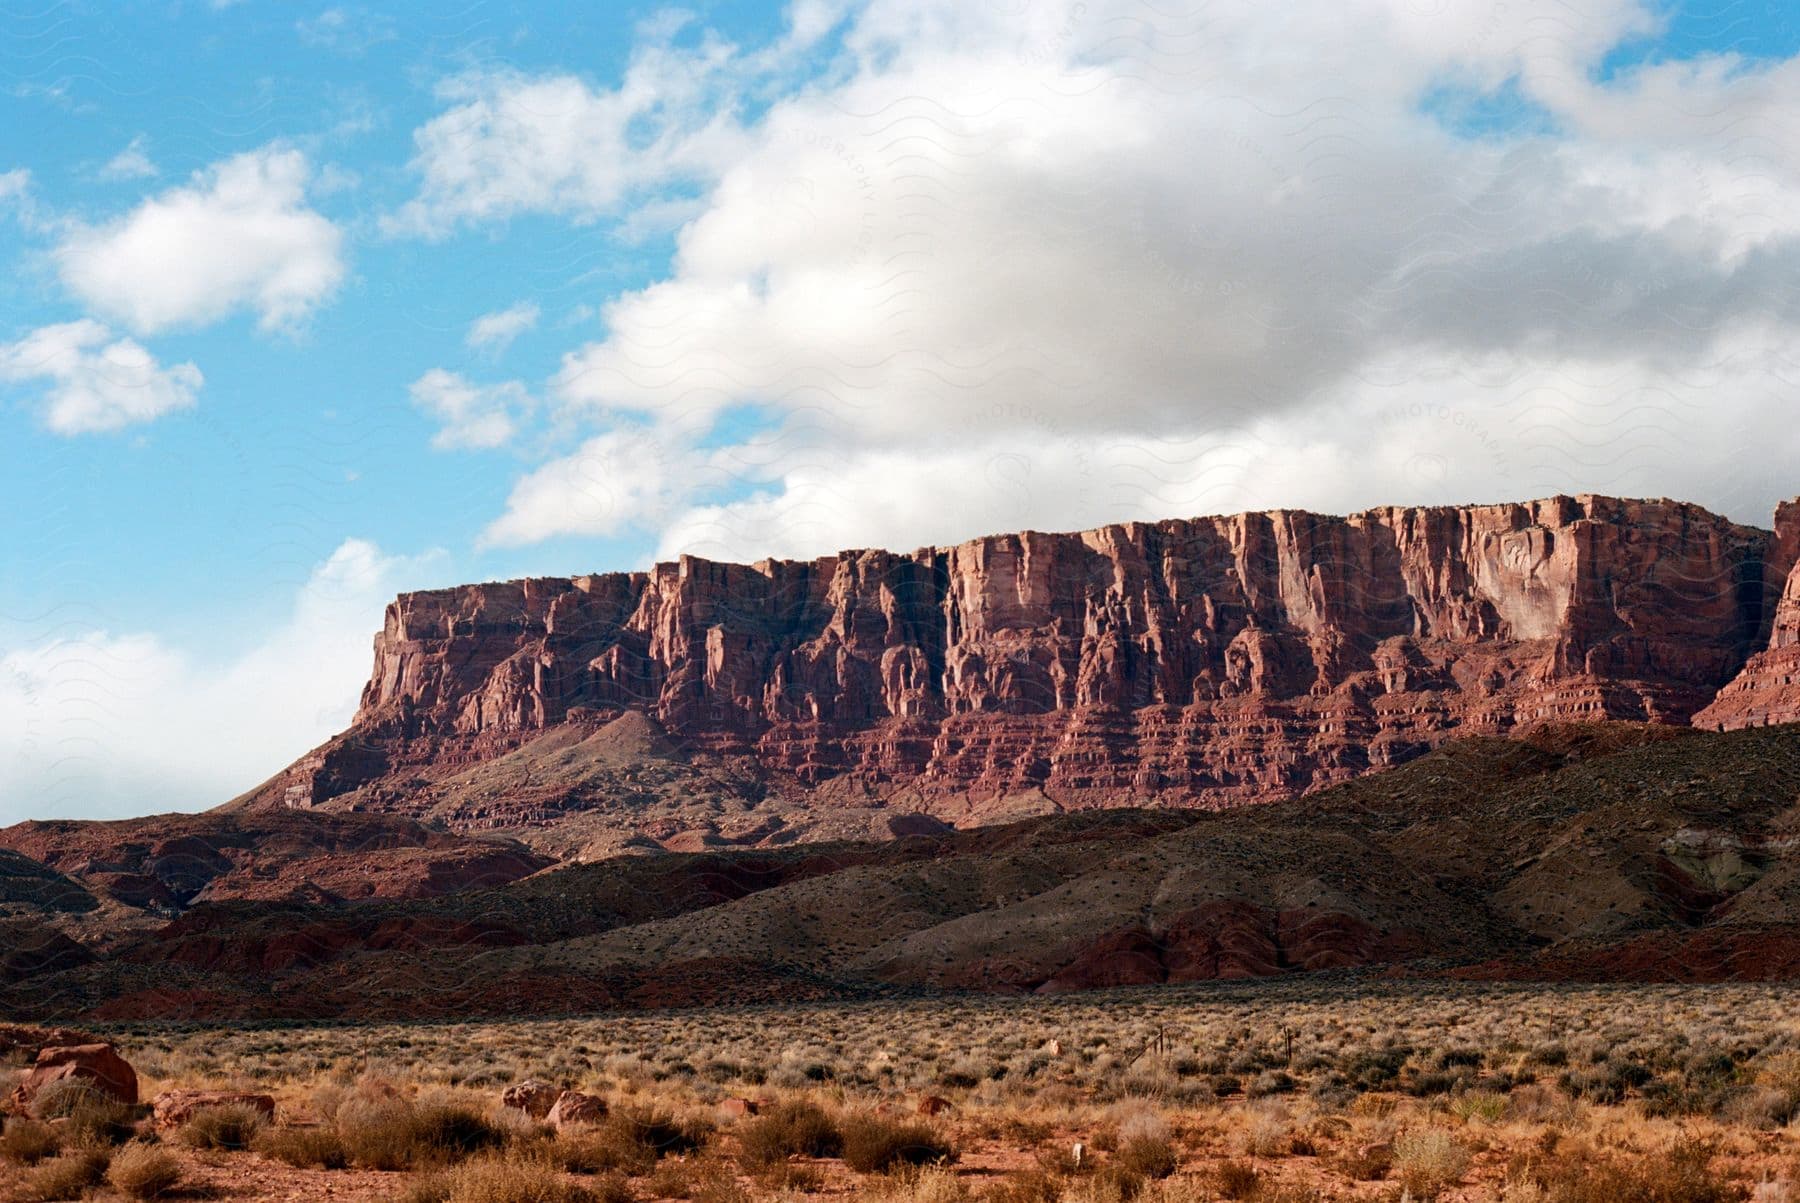 Landscape of geological canyons in a place of dry vegetation on a blue sky day with clouds.